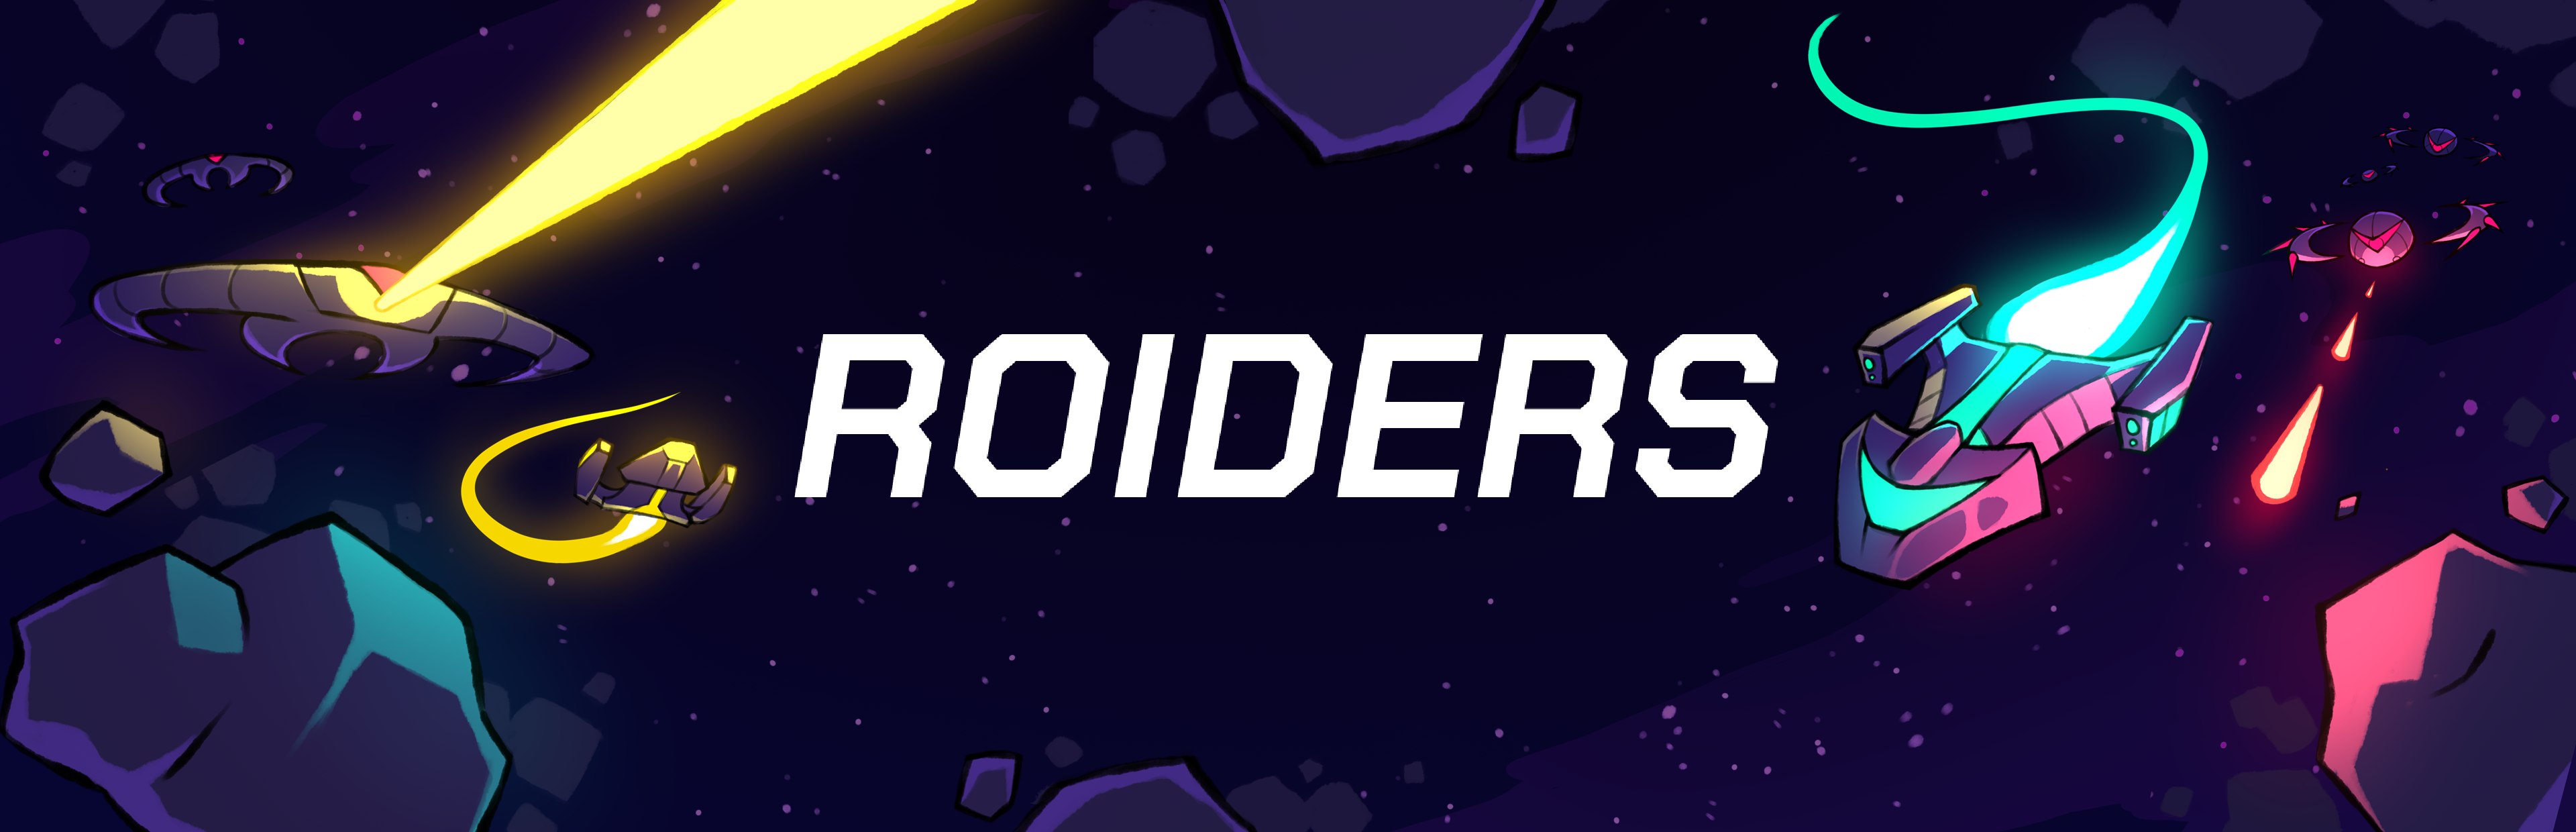 ROIDERS